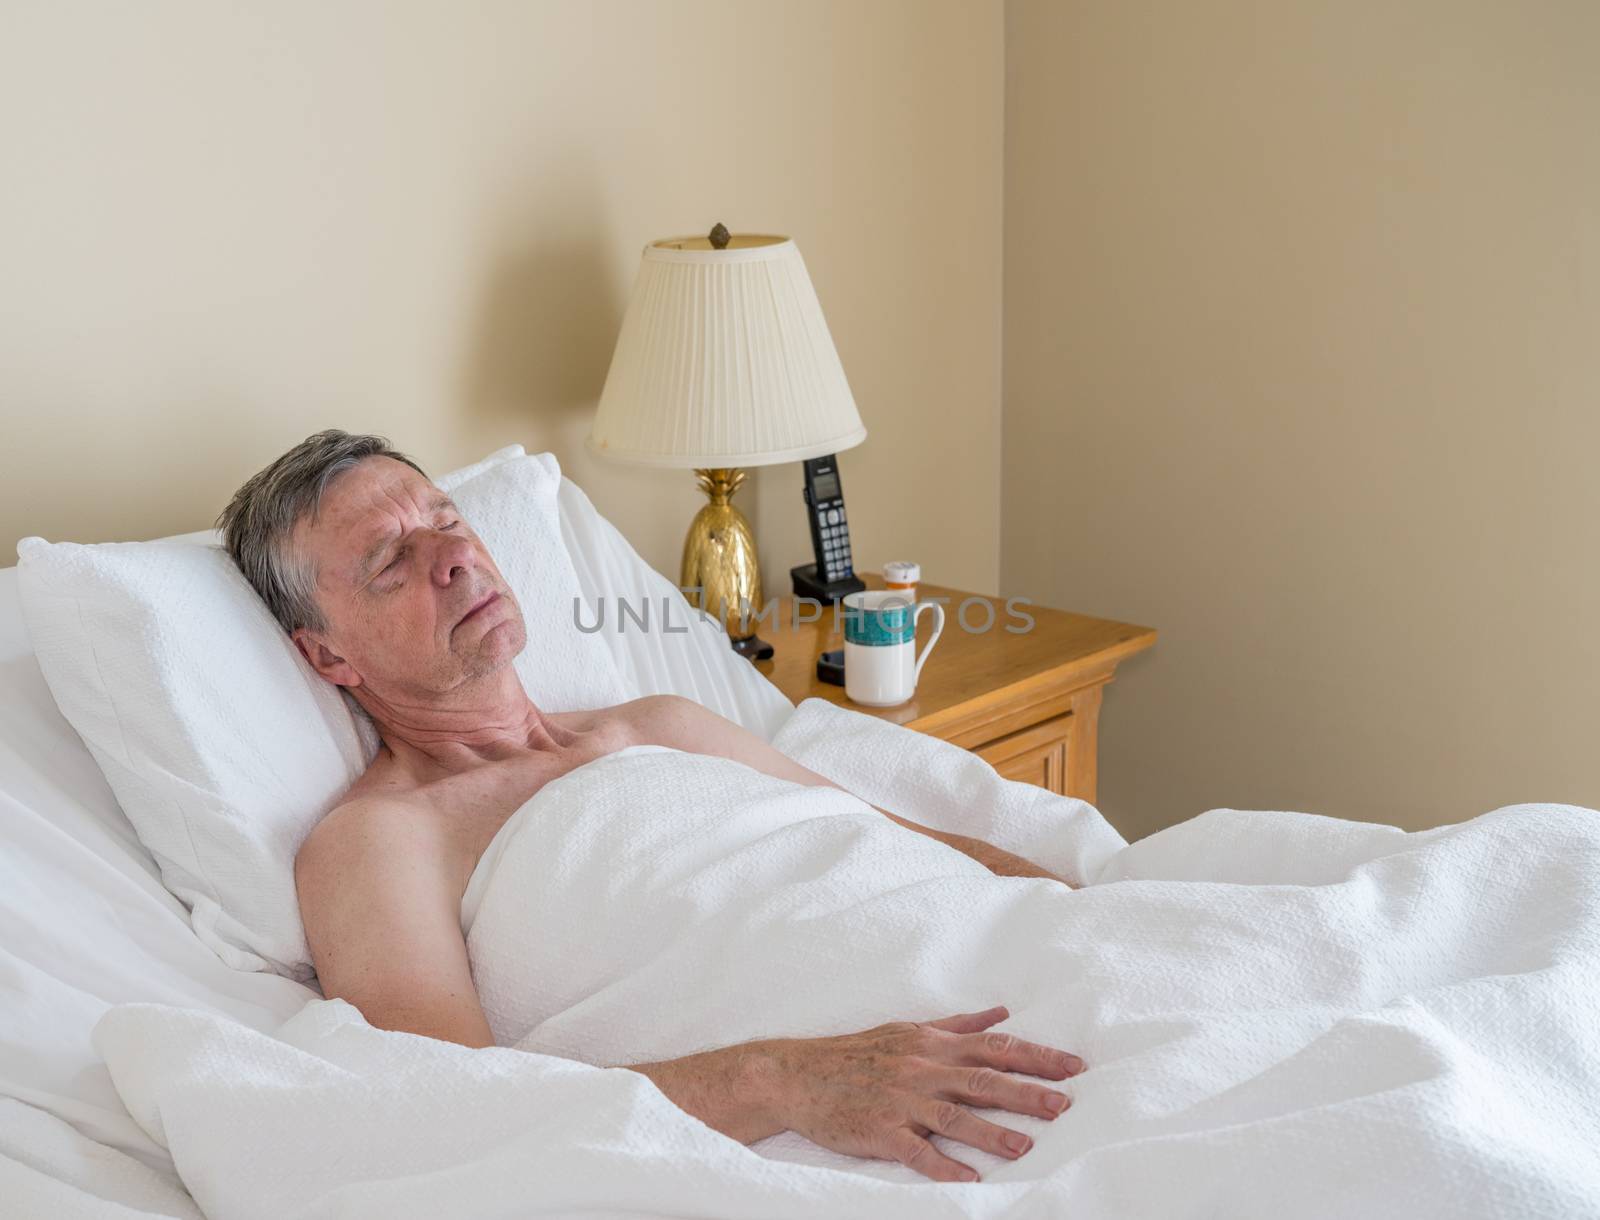 Senior retired caucasian man lying in adjustable bed on incline. He is asleep with cup of coffee on table